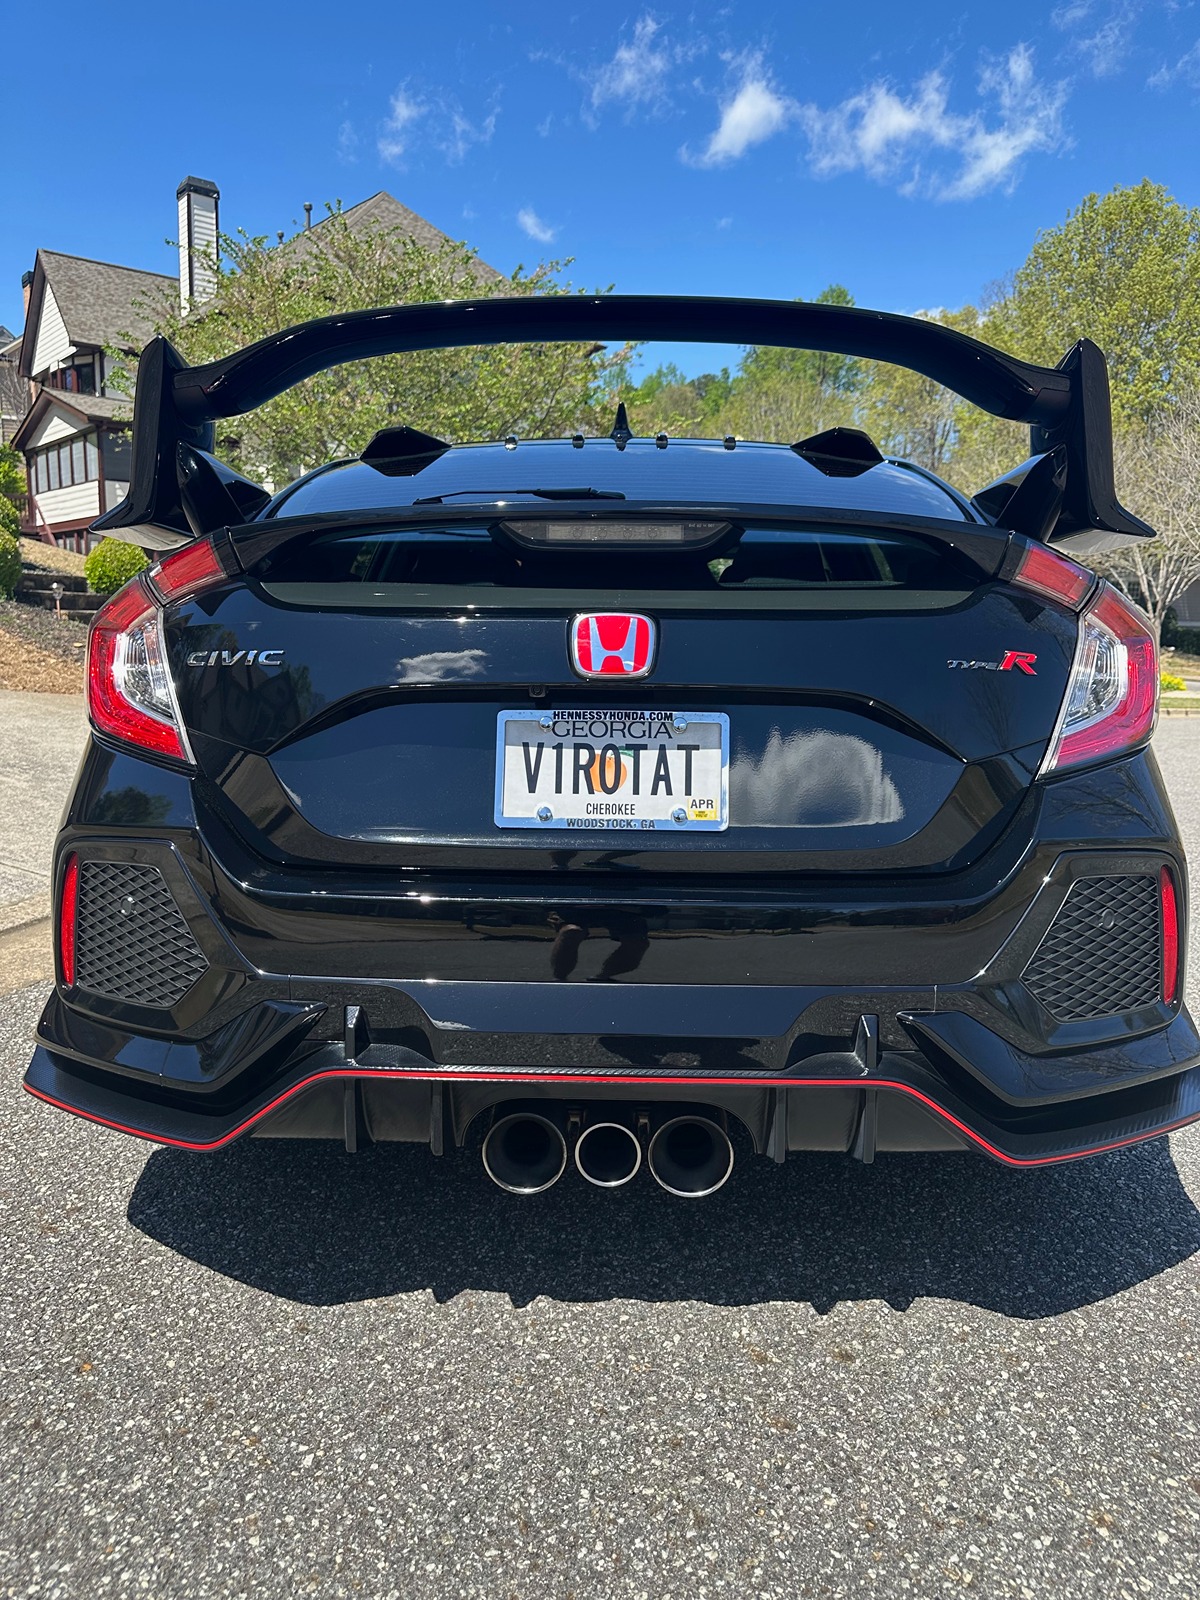 Honda Civic 10th gen Sold. 2019 Civic Type R for sale IMG_8138